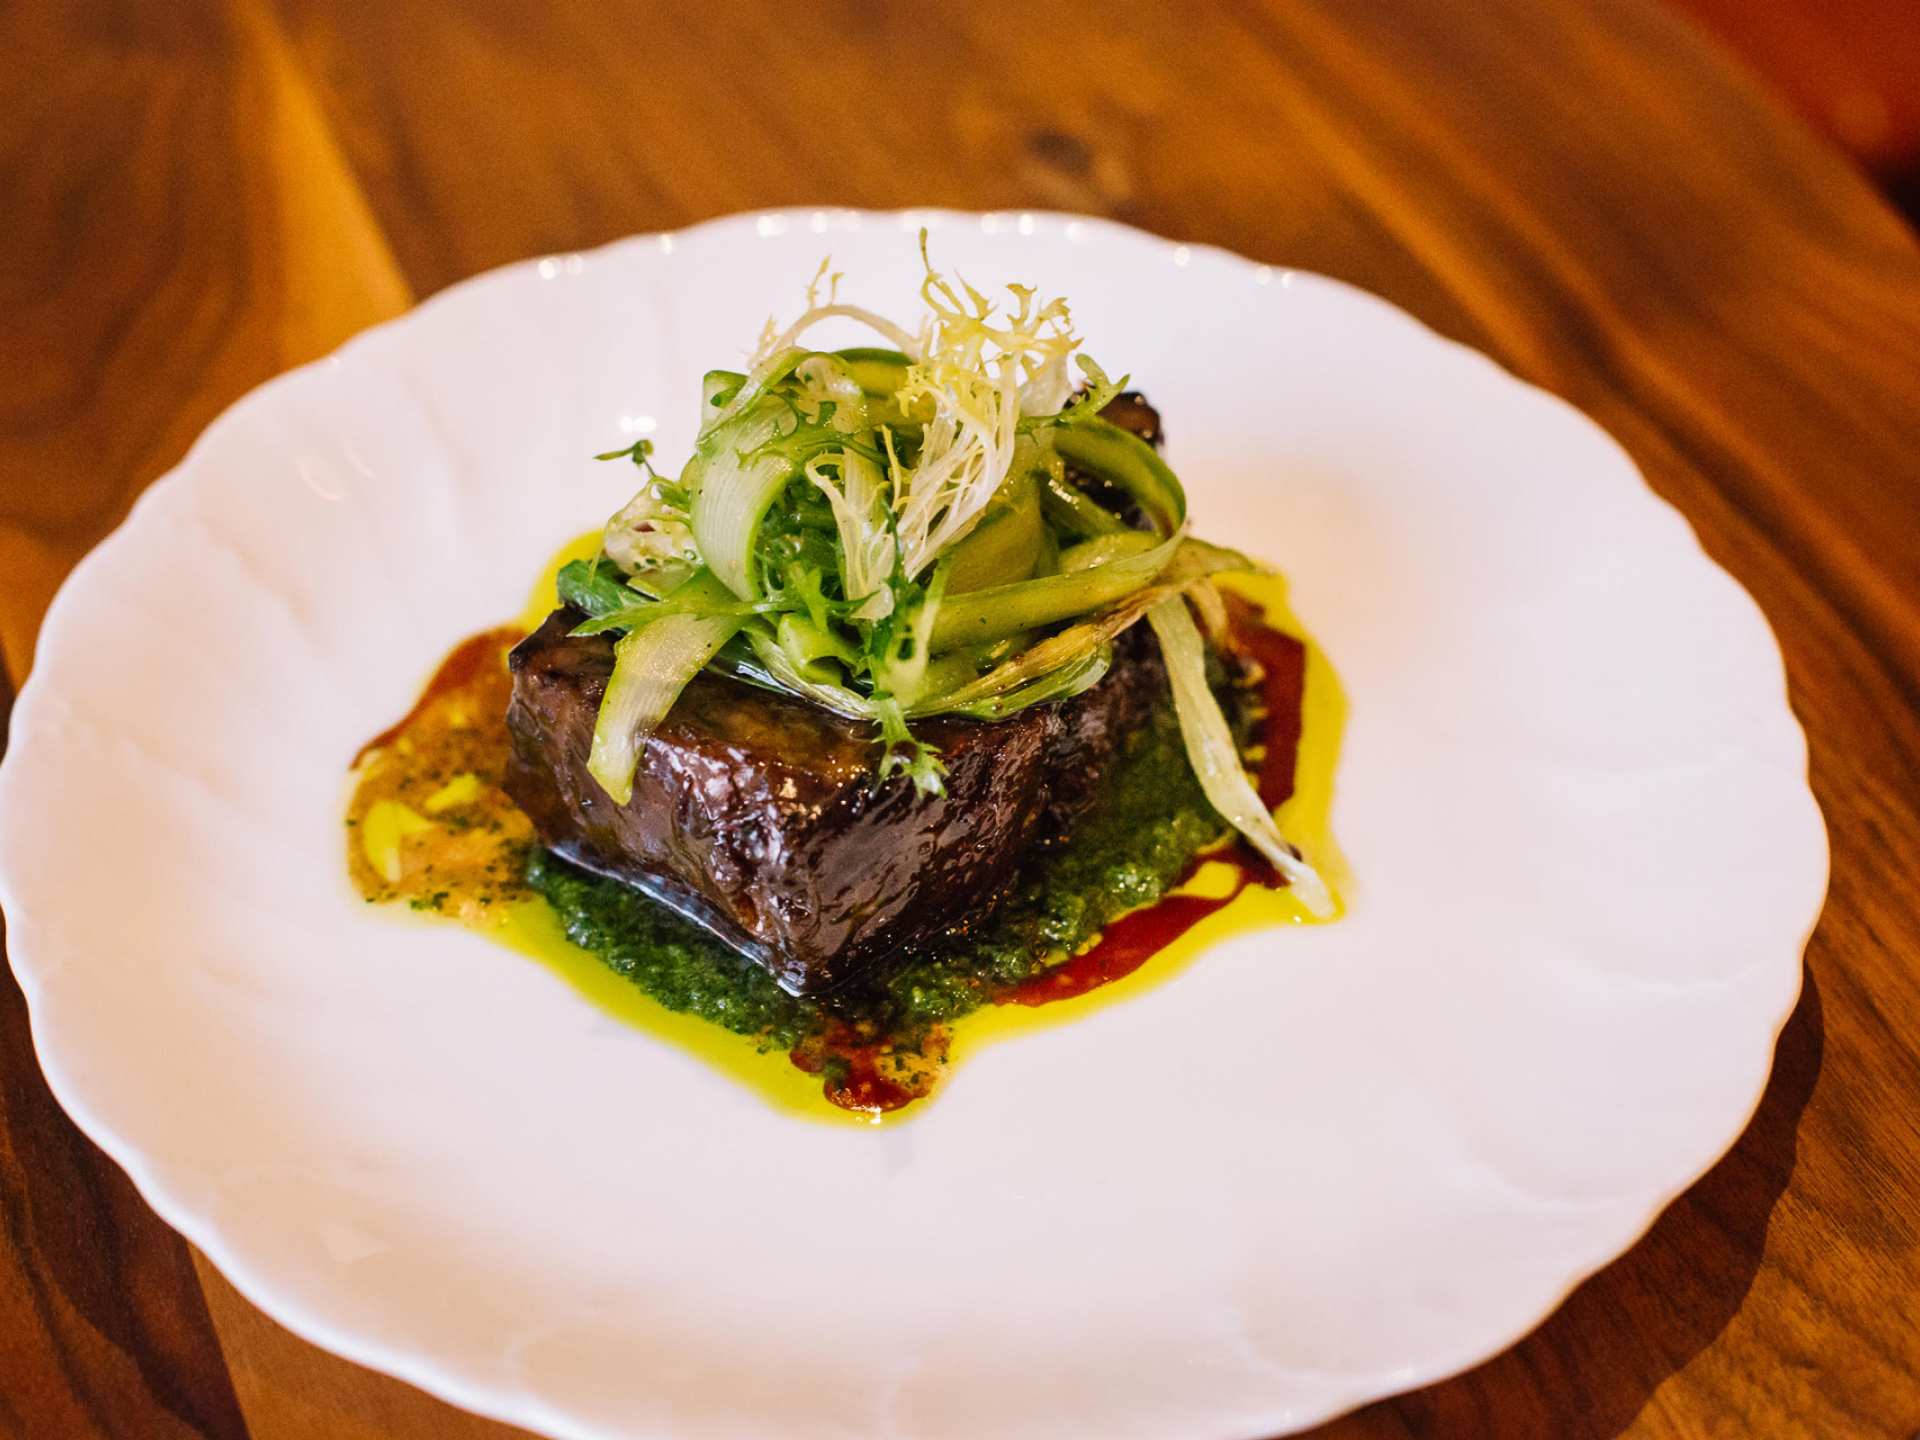 Michelin recommended and Michelin star restaurants in Toronto | Short rib at Alobar Yorkville